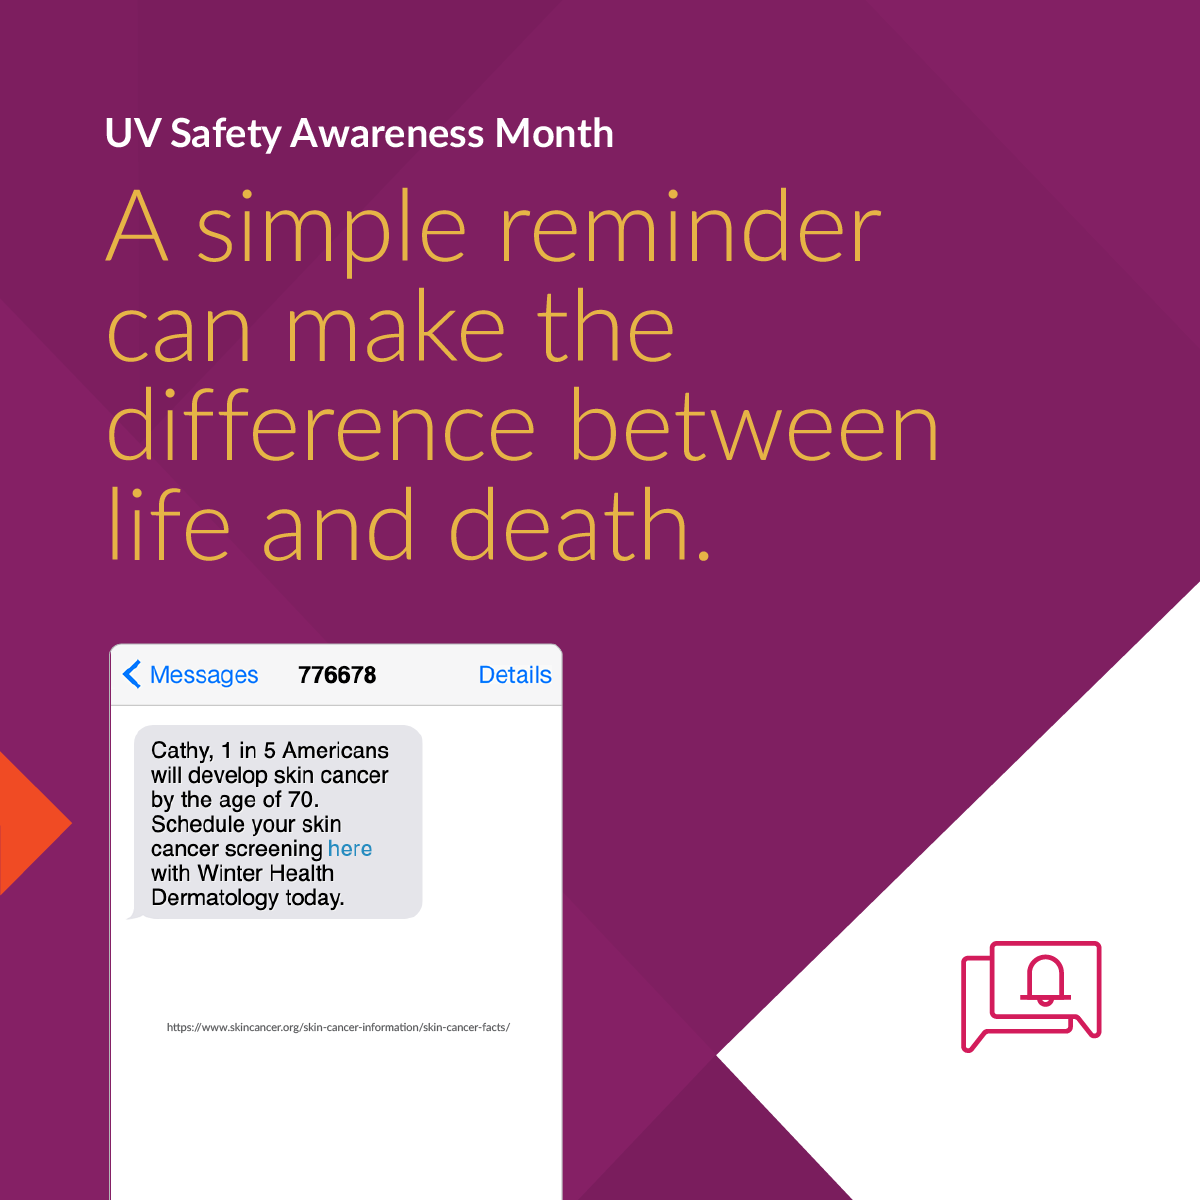 Join us in raising awareness about UV protection. A simple reminder can make the difference between life & death. Download our Health Awareness Campaigns Playbook to discover how our advanced solutions can help stay in touch. #UVProtectionMonth hubs.ly/Q01Xt2GS0